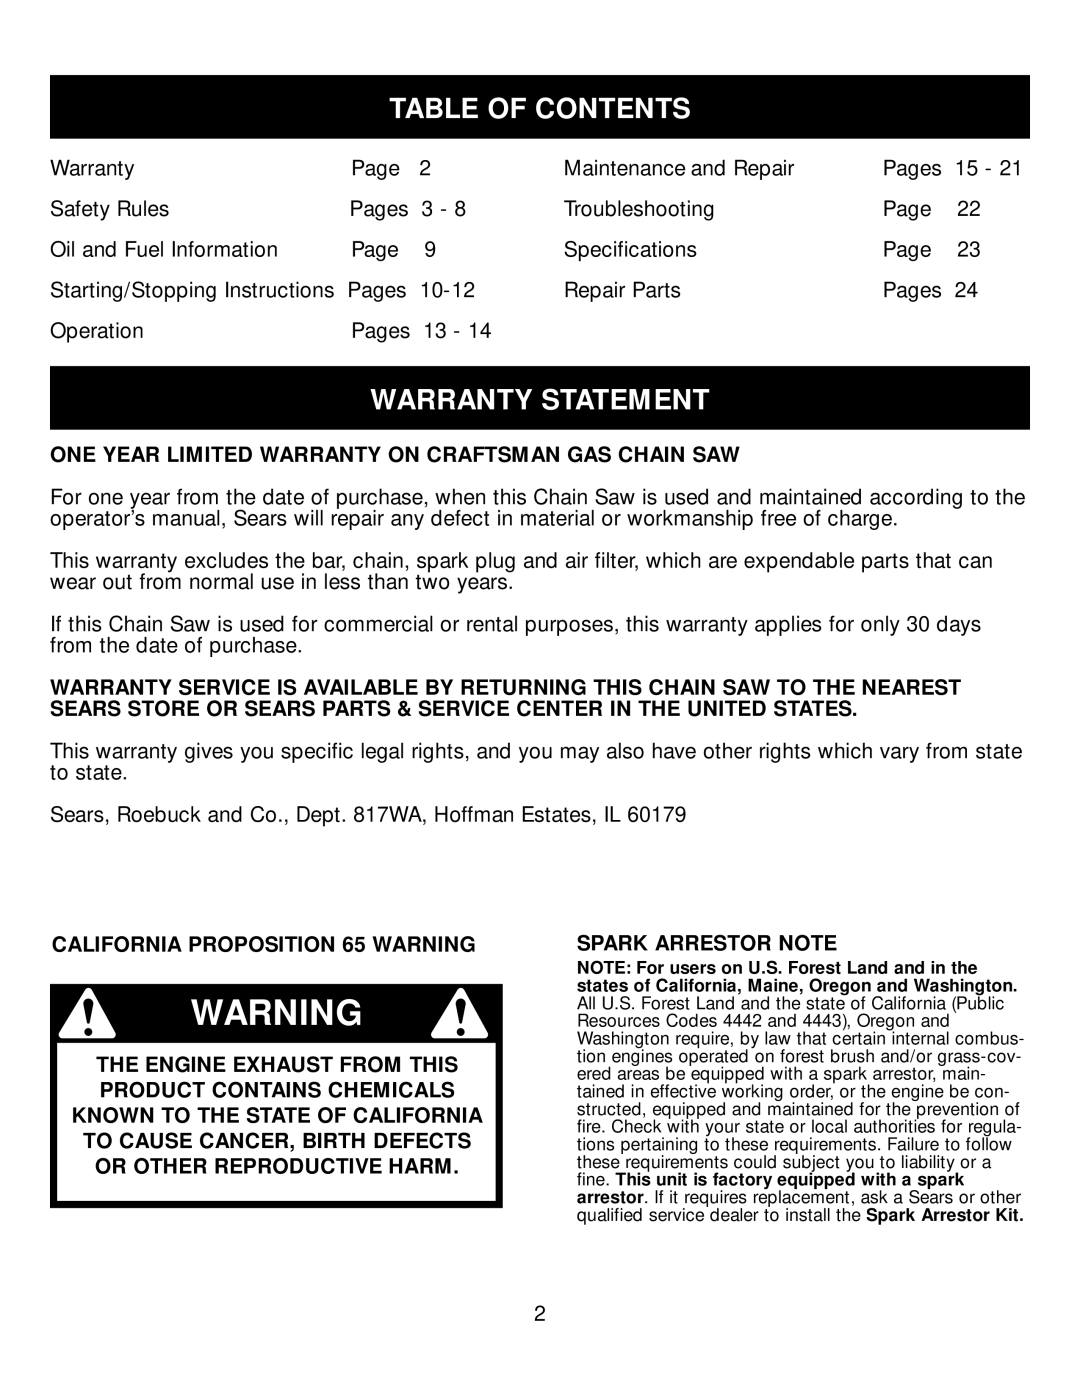 Craftsman 316350840 manual Table Of Contents, Warranty Statement, CALIFORNIA PROPOSITION 65 WARNING, Spark Arrestor Note 